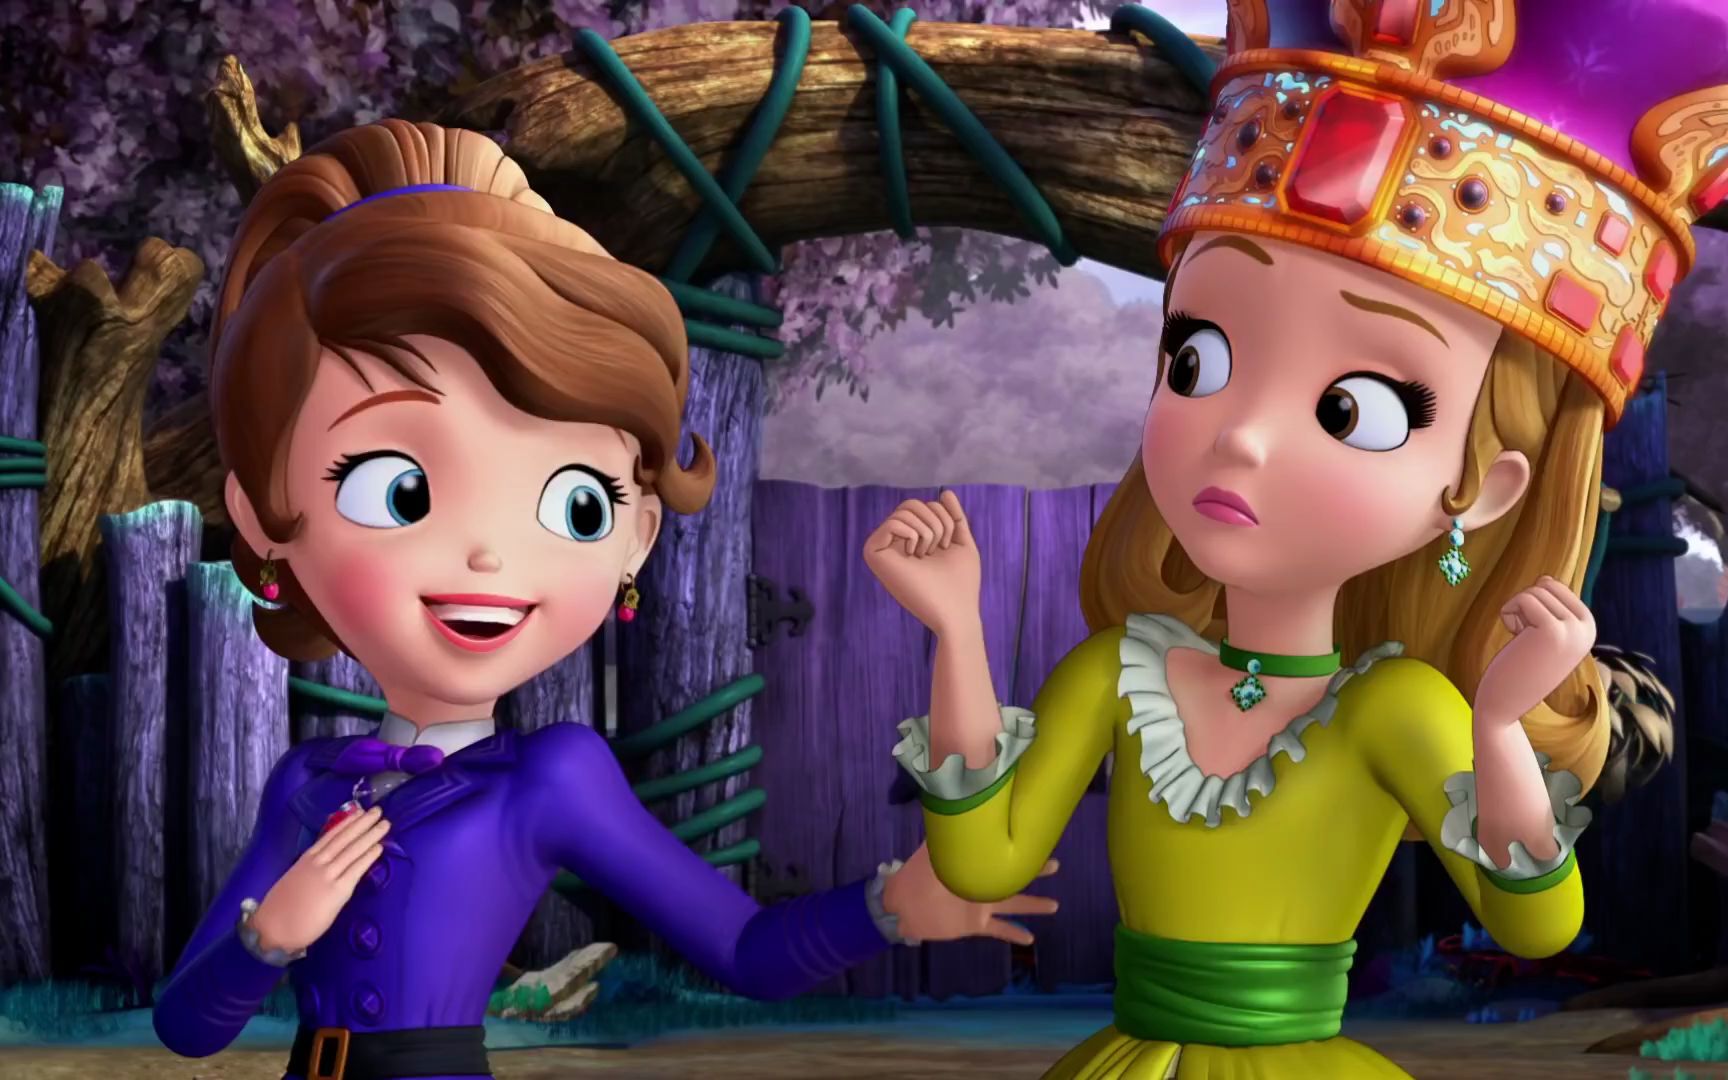 【sofia the first 小公主苏菲亚 s4 第四季】the mystic isles 